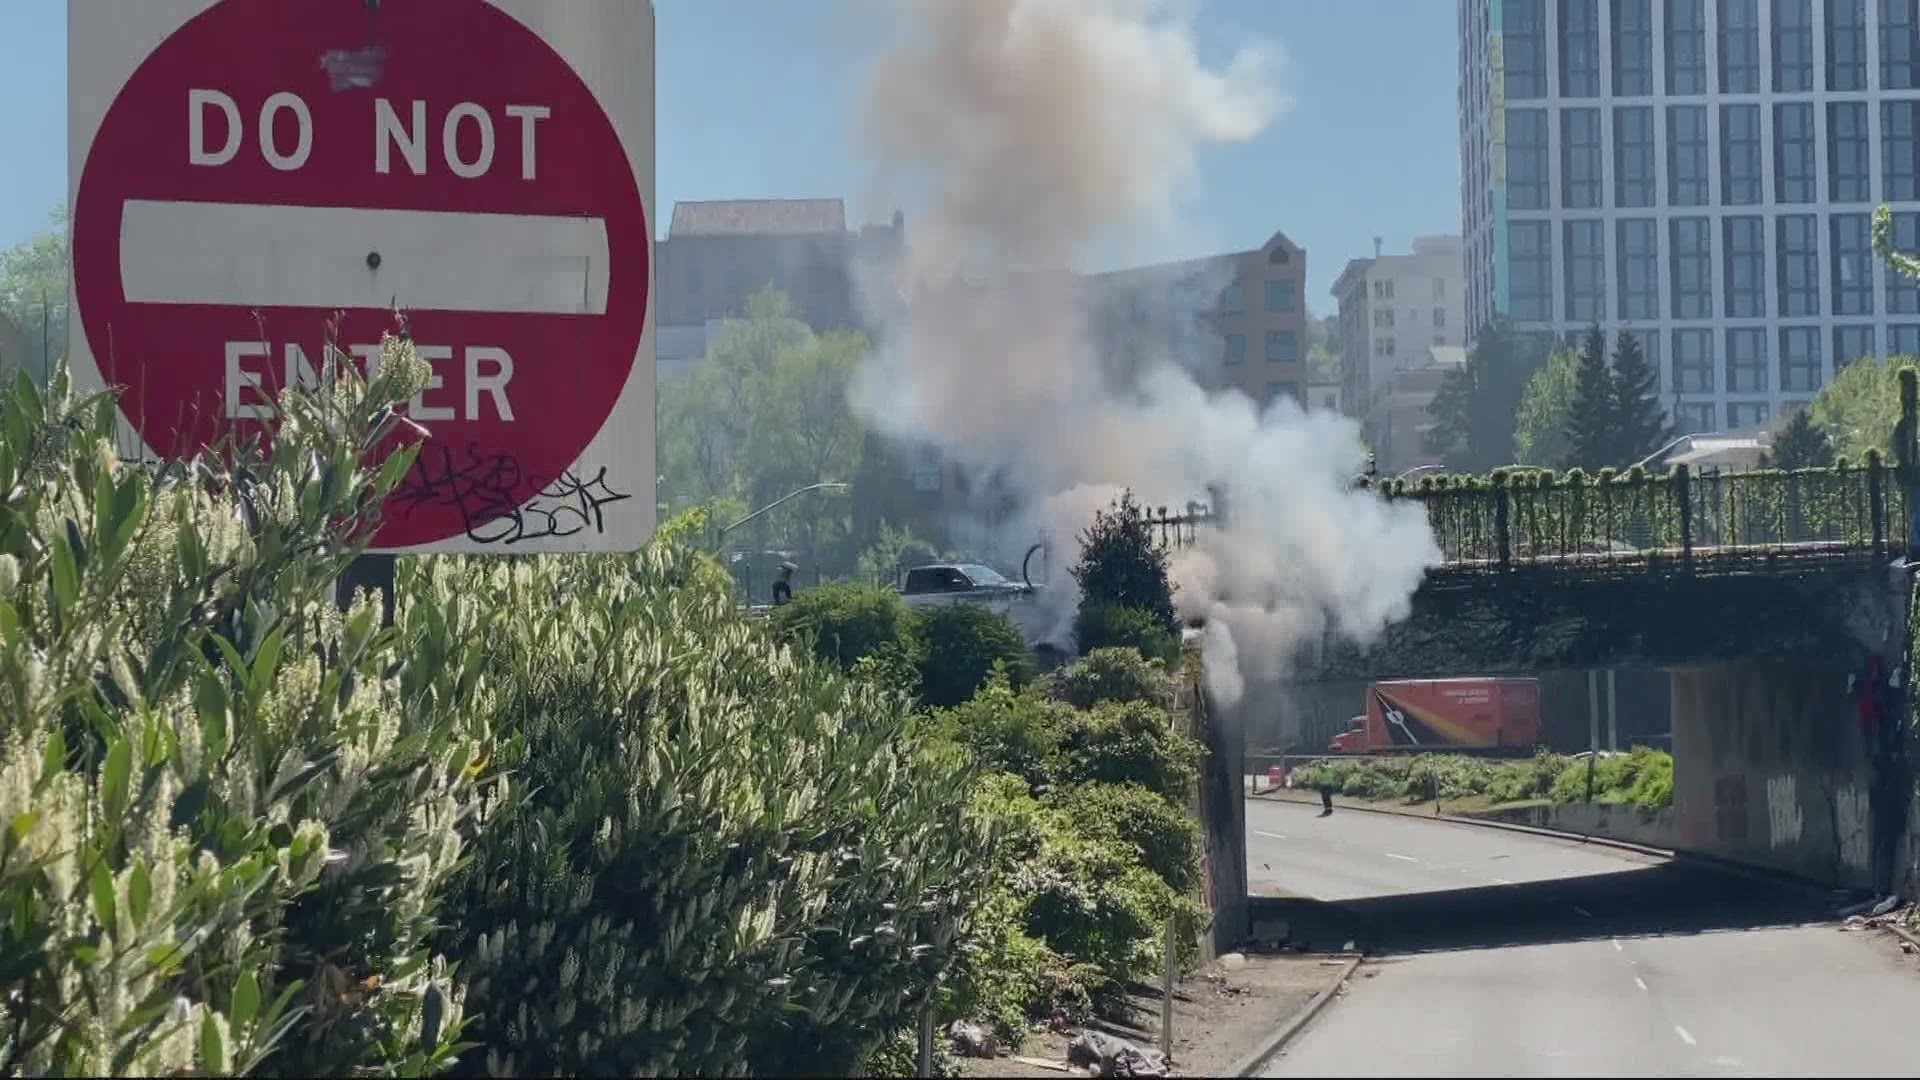 Most of the fires are caused by people simply trying to stay warm, but dry vegetation in an urban environment can spell disaster. KGW's Maggie Vespa reports.